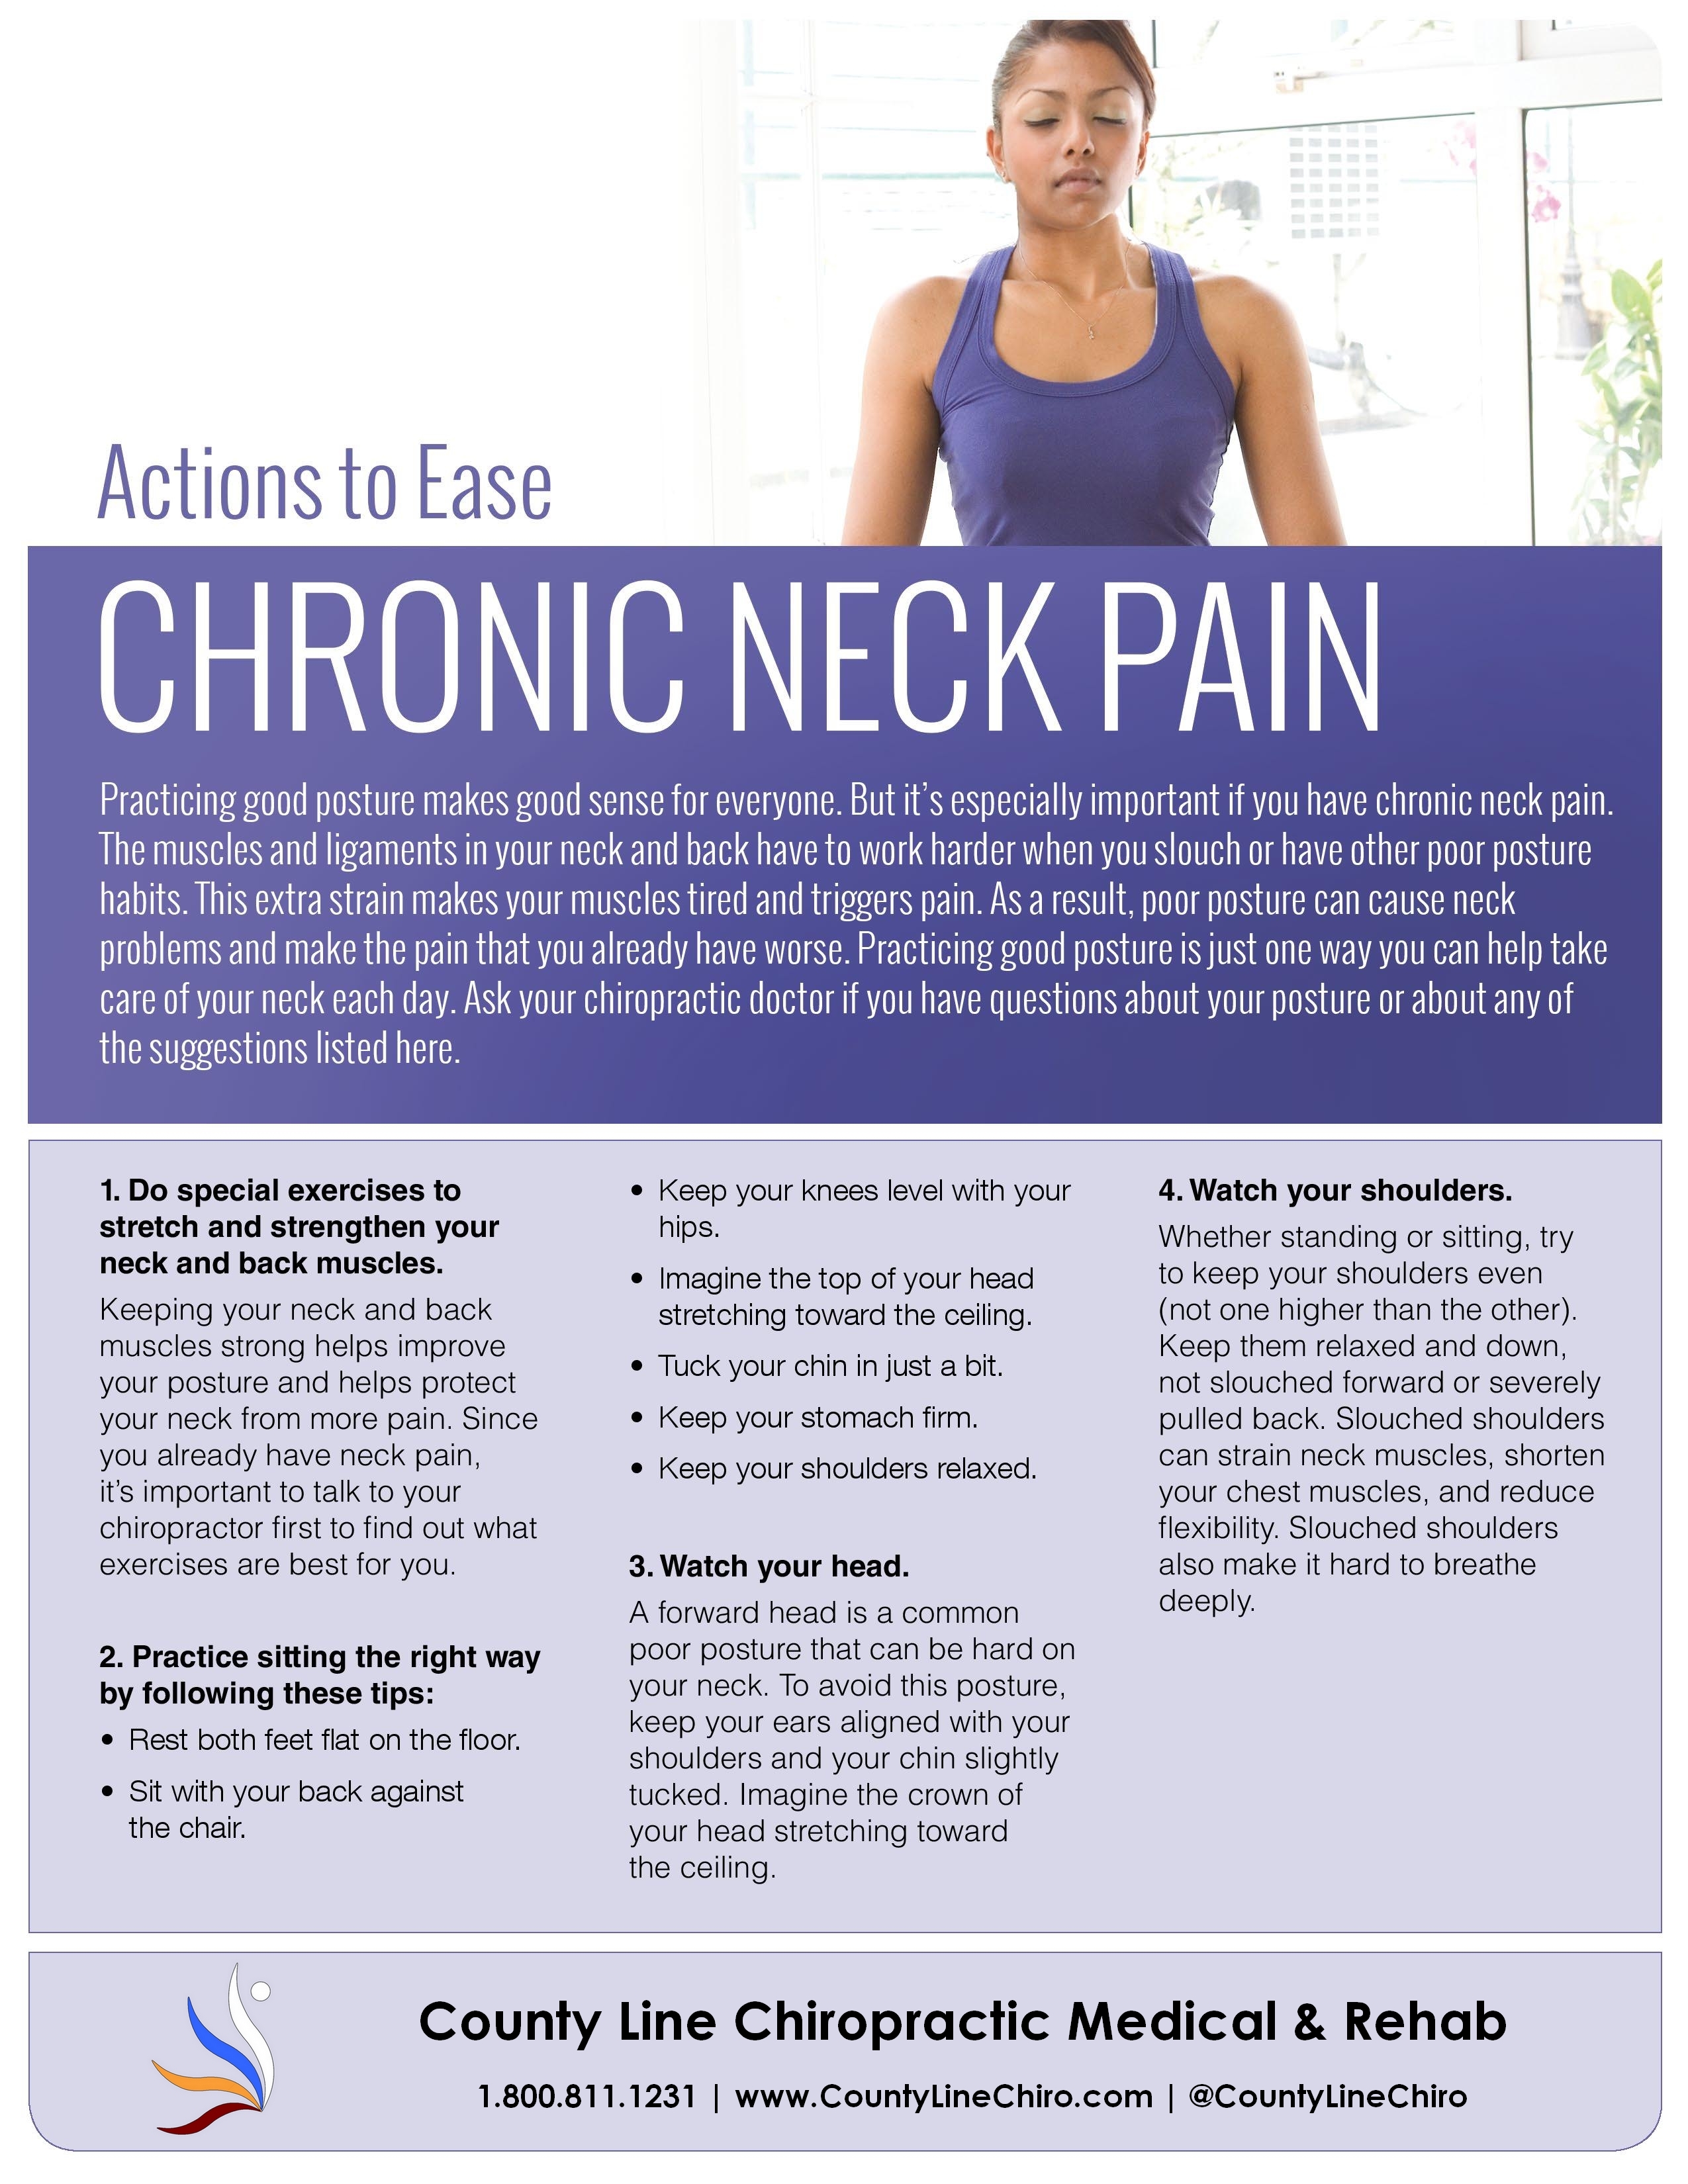 Neck Pain When Sitting: Posture + Exercises